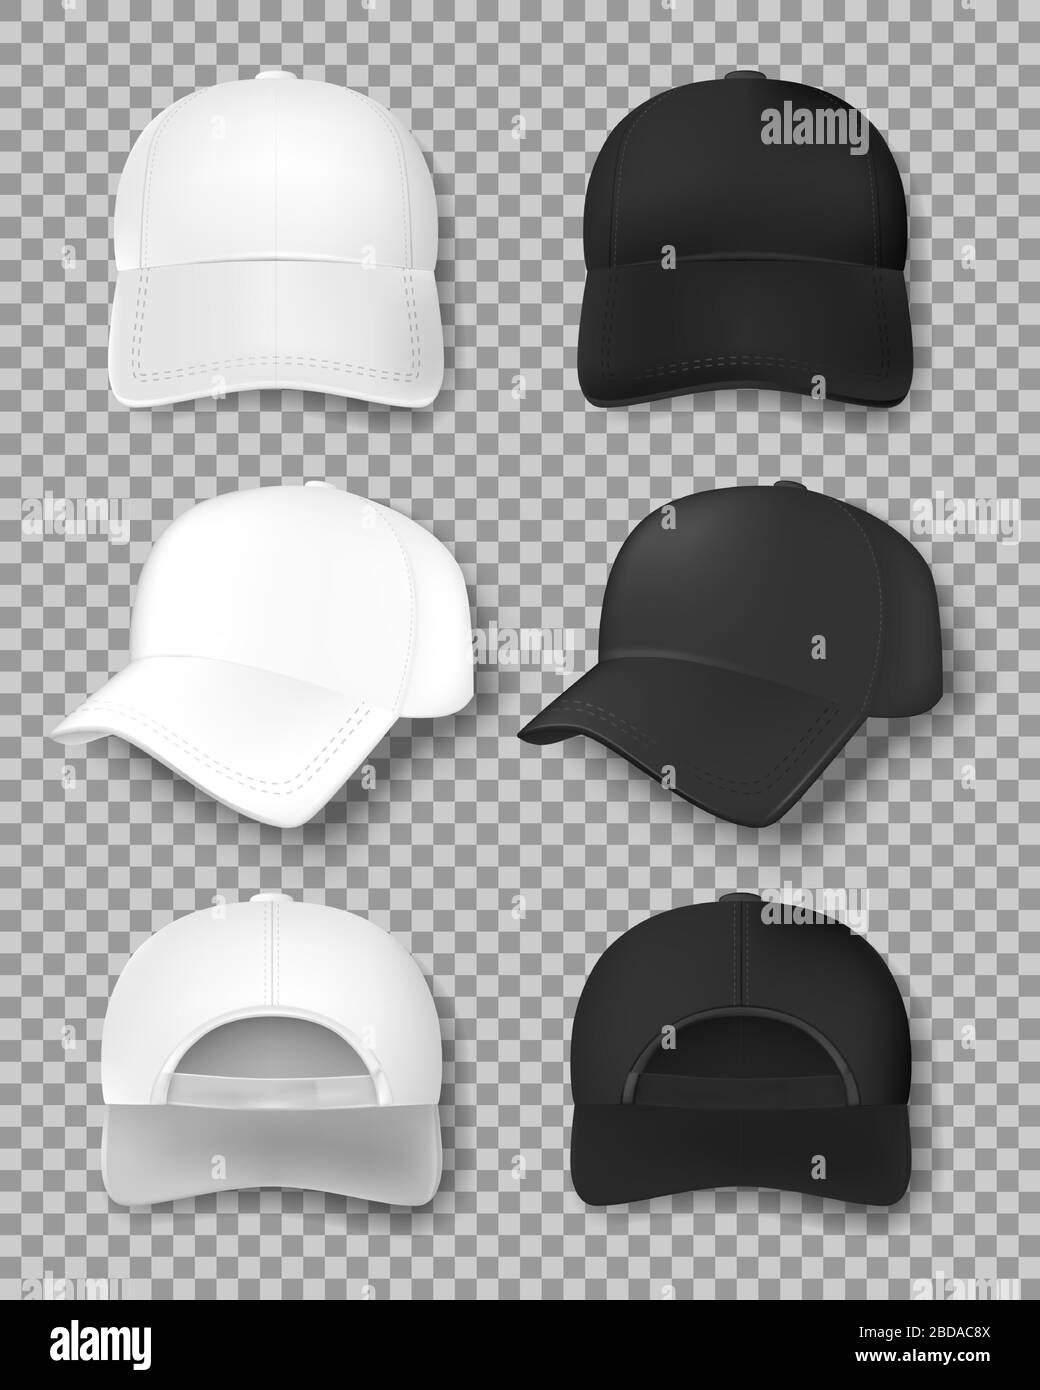 Download Realistic Baseball Cap Mockup Isolated On Transparent Background White And Black Textile Cap Front Back And Side View Uniform Hat Template Vector Stock Vector Image Art Alamy